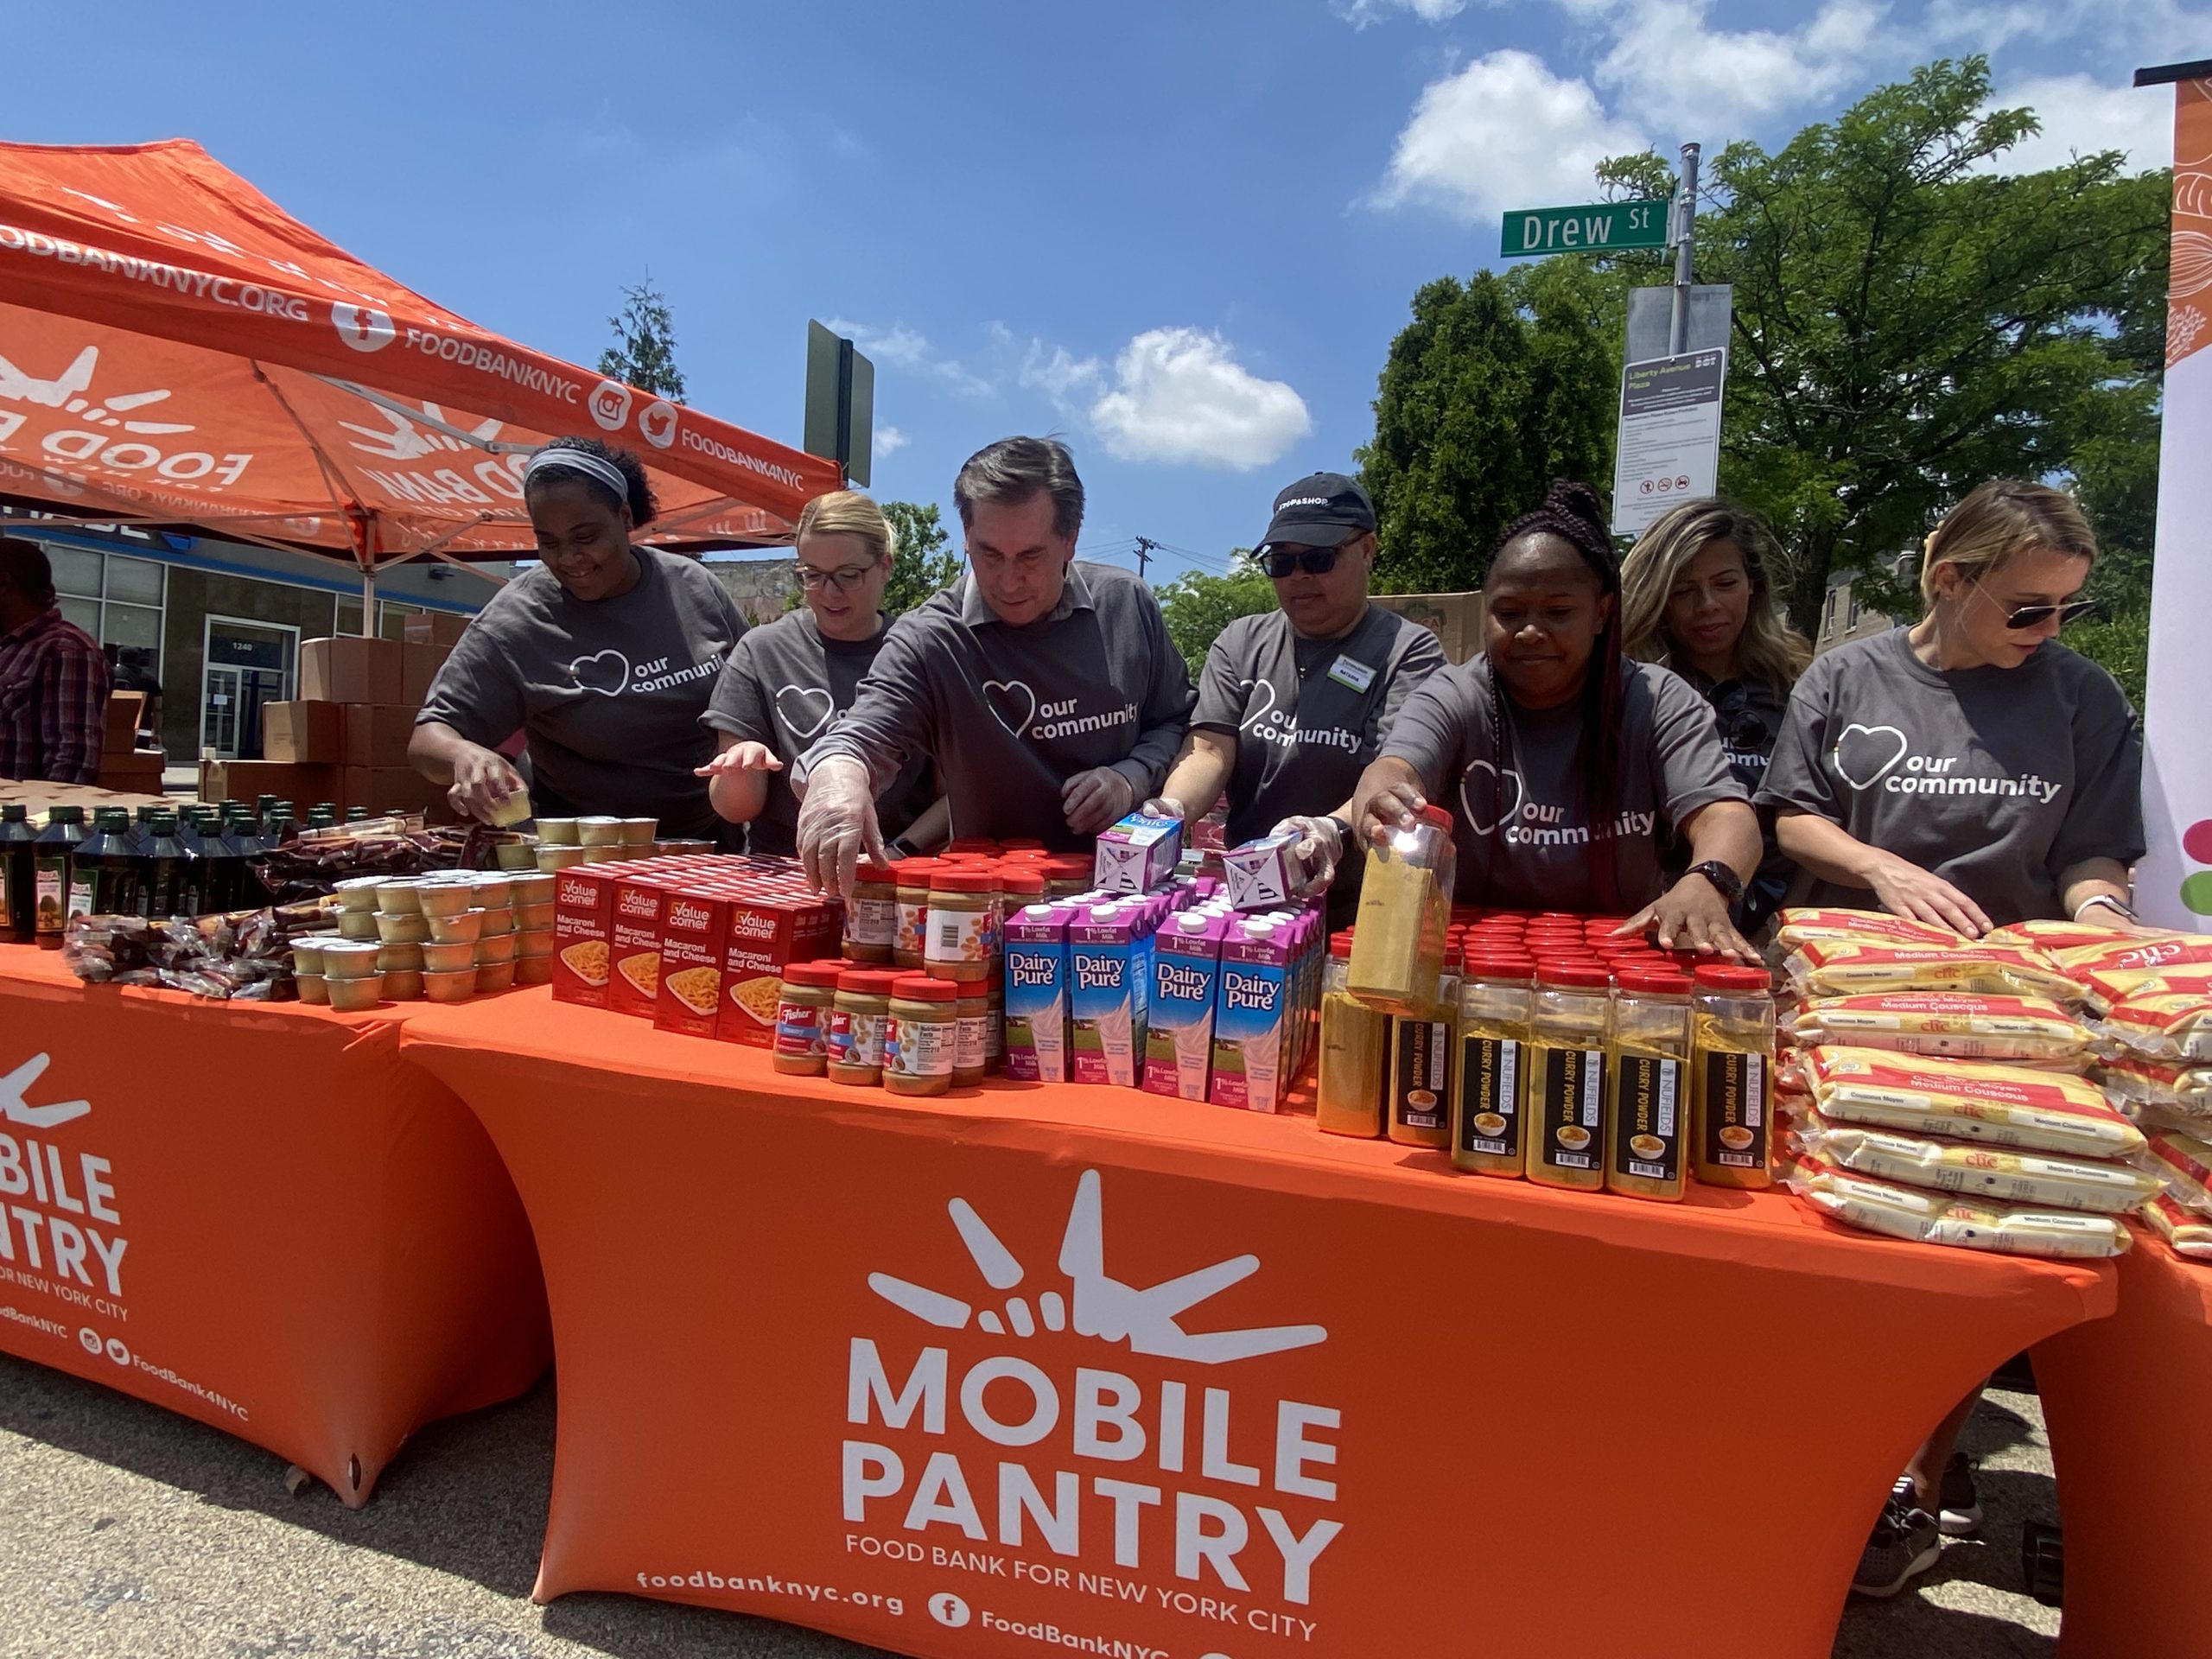 Food Bank’s mobile pantry to serve Ozone Park